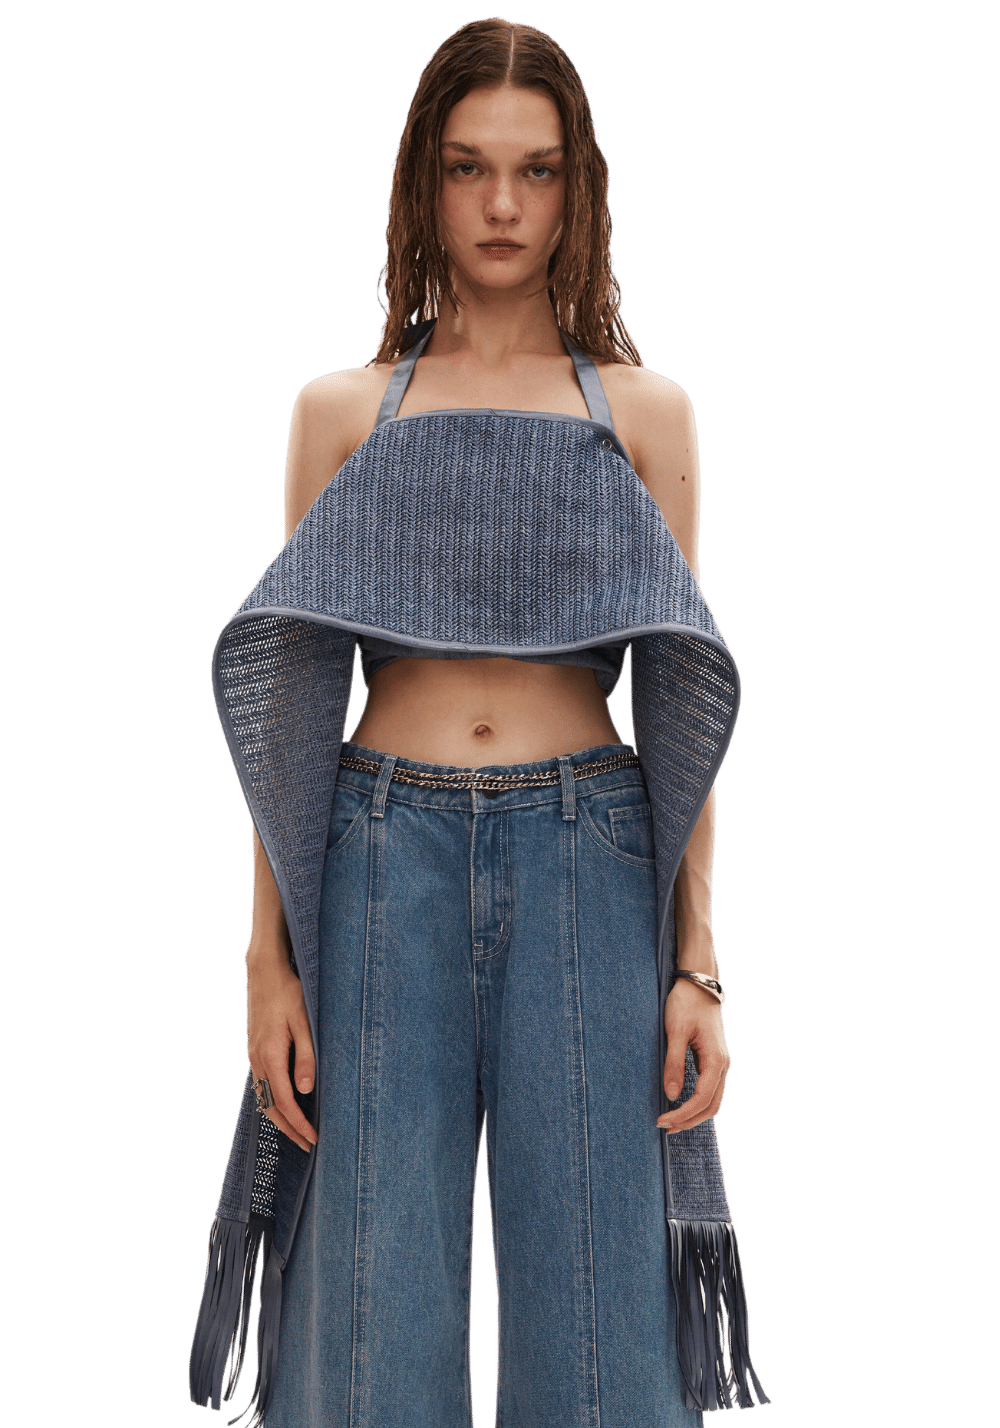 Halter Knitted Scarf Style Top - PSYLOS 1, Halter Knitted Scarf Style Top, T-Shirt, LEEWEI, PSYLOS 1